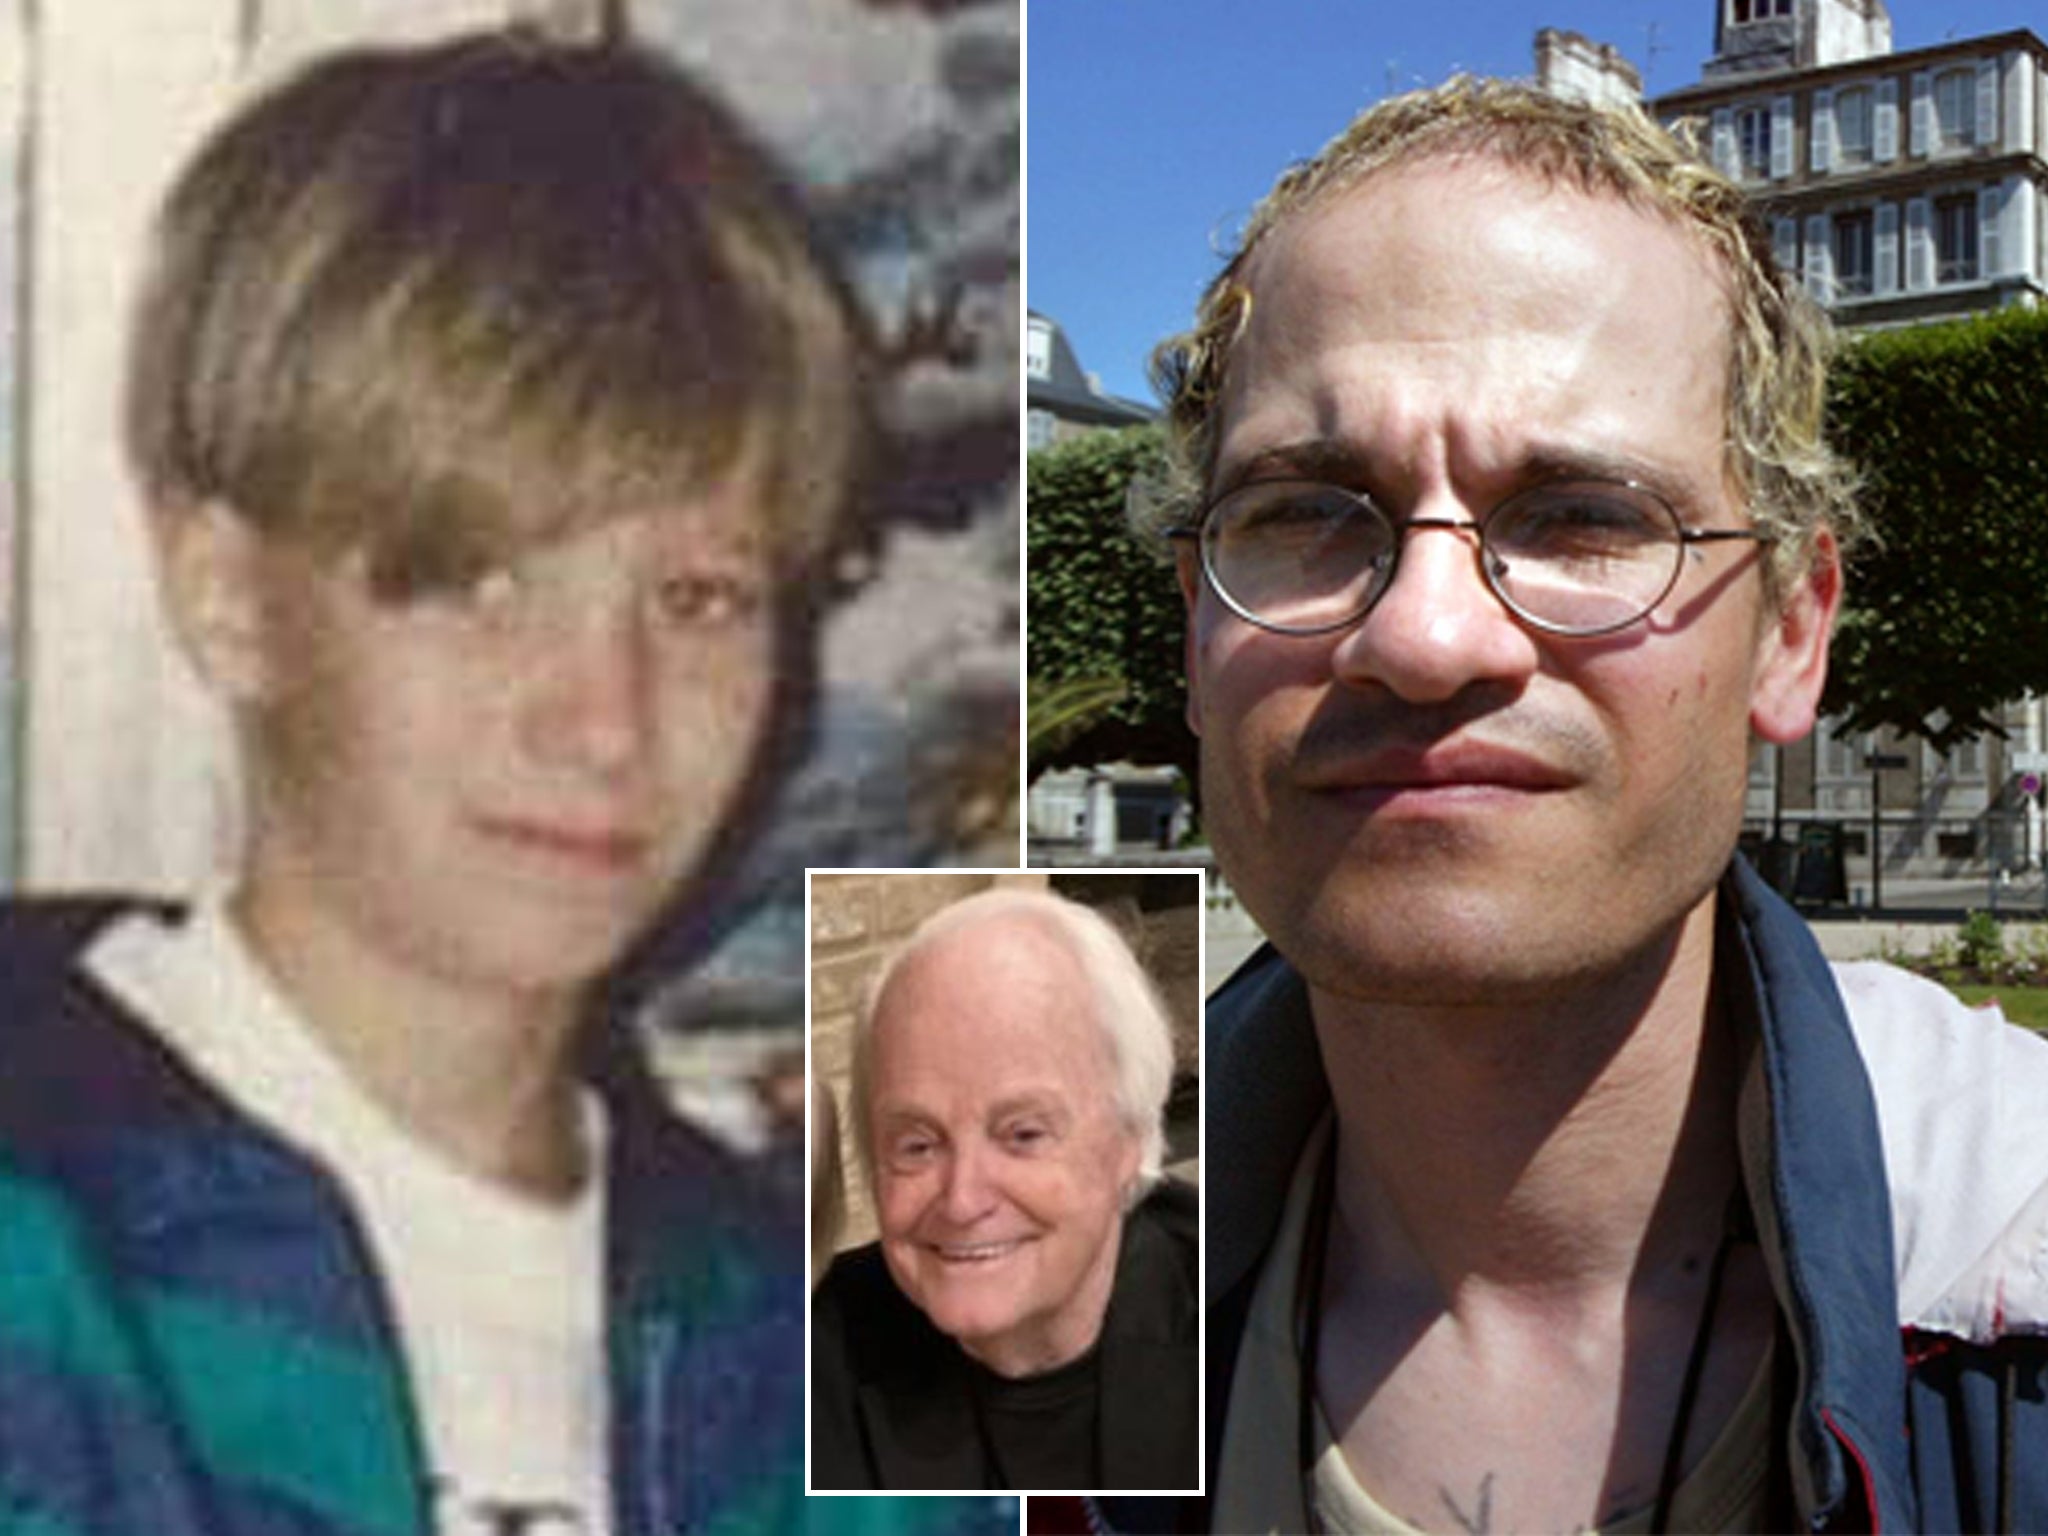 A French imposter convinced everyone he was missing Texas teen Nicholas Barclay pic